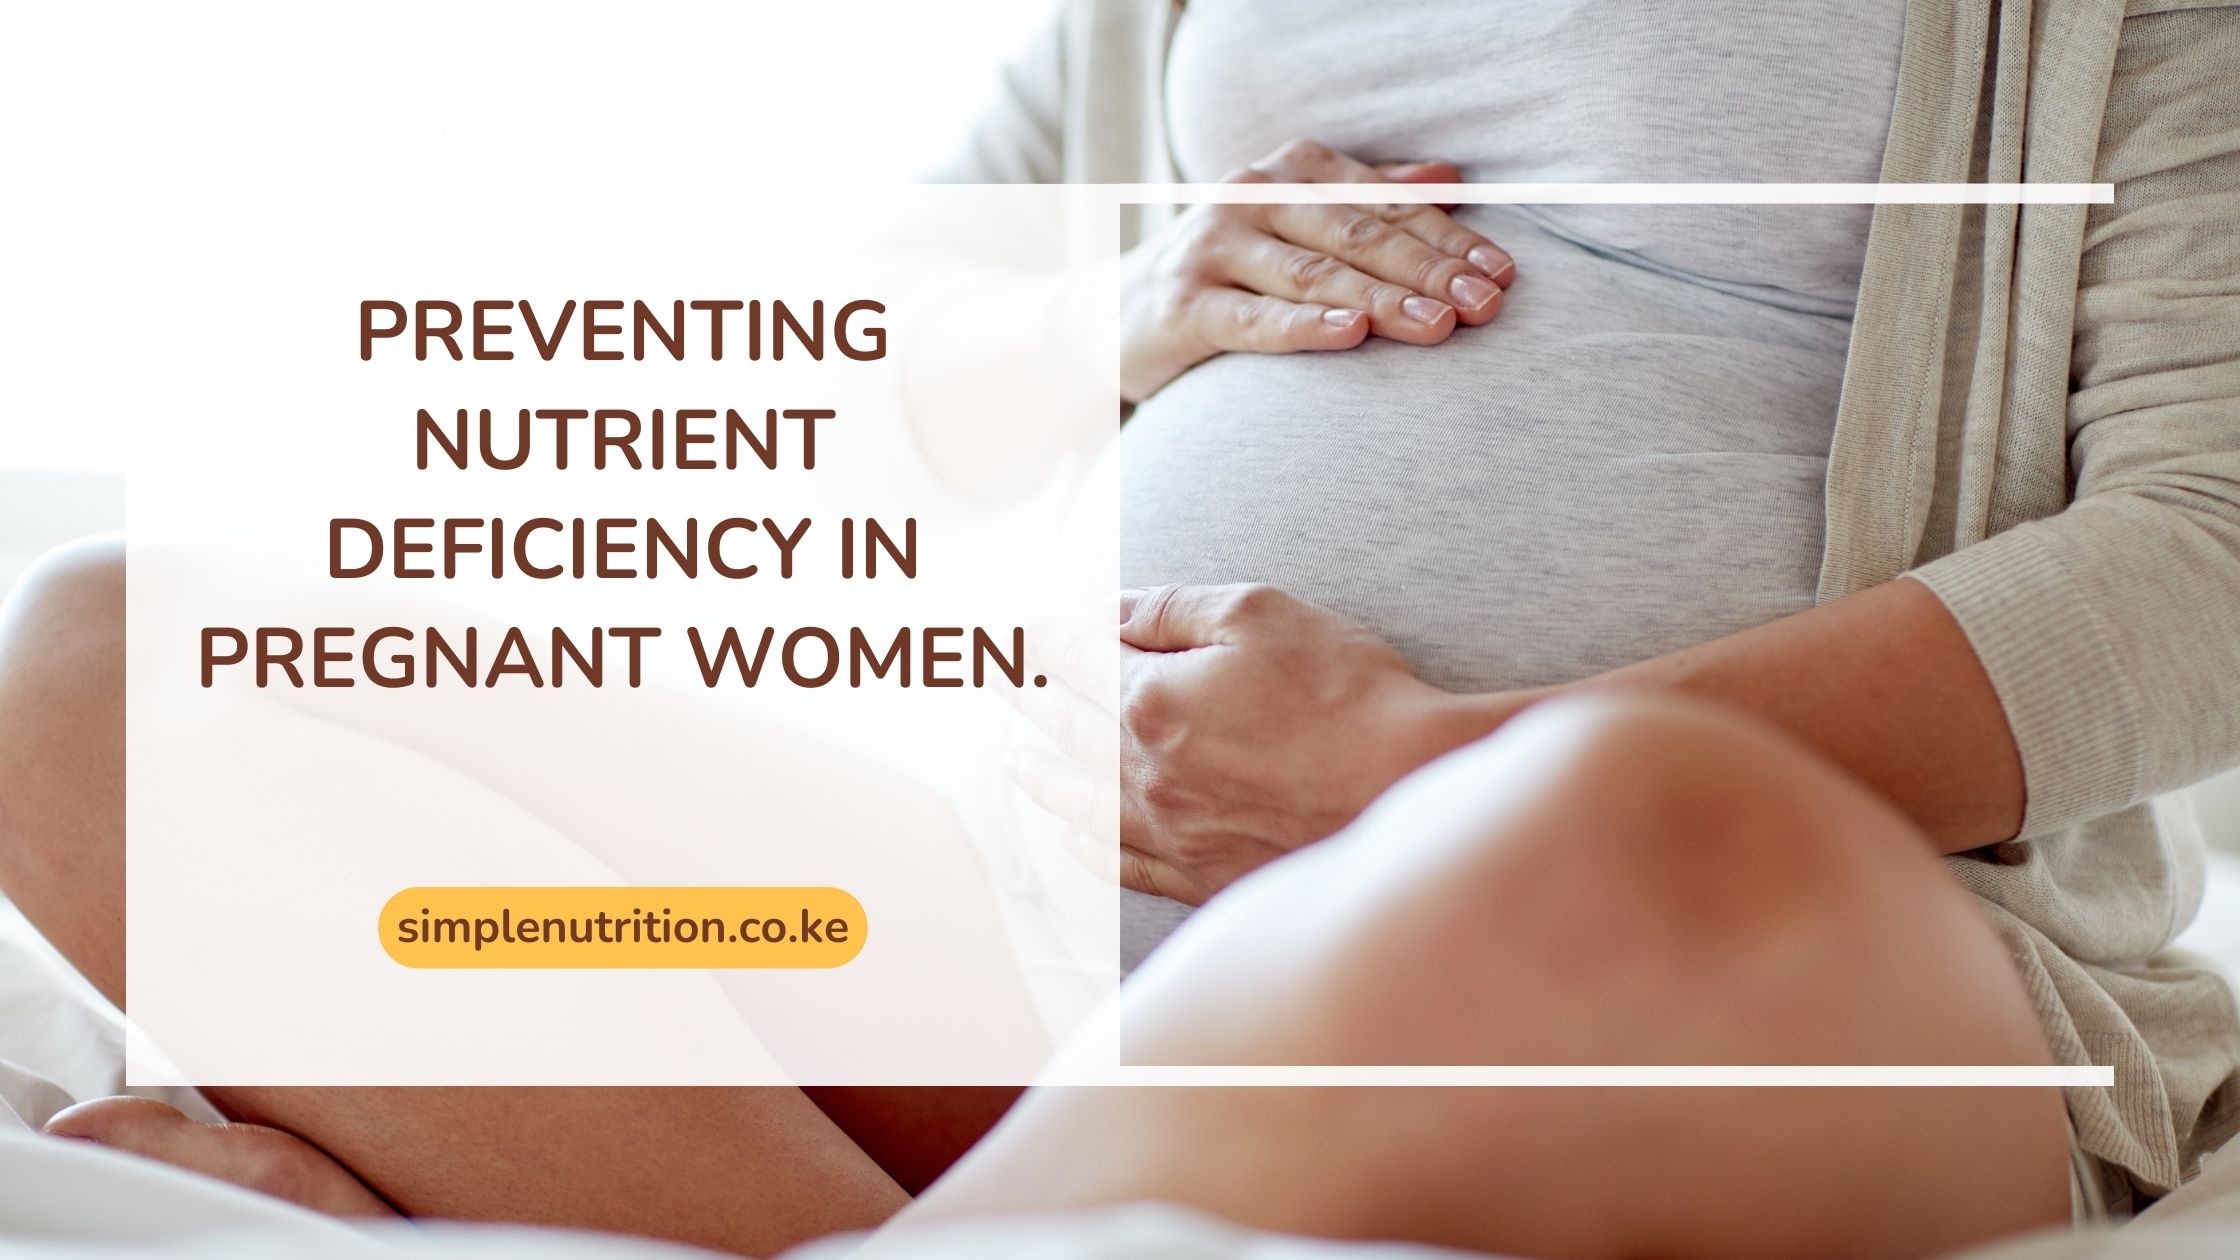 How to Prevent Nutrient Deficiency in Pregnancy.